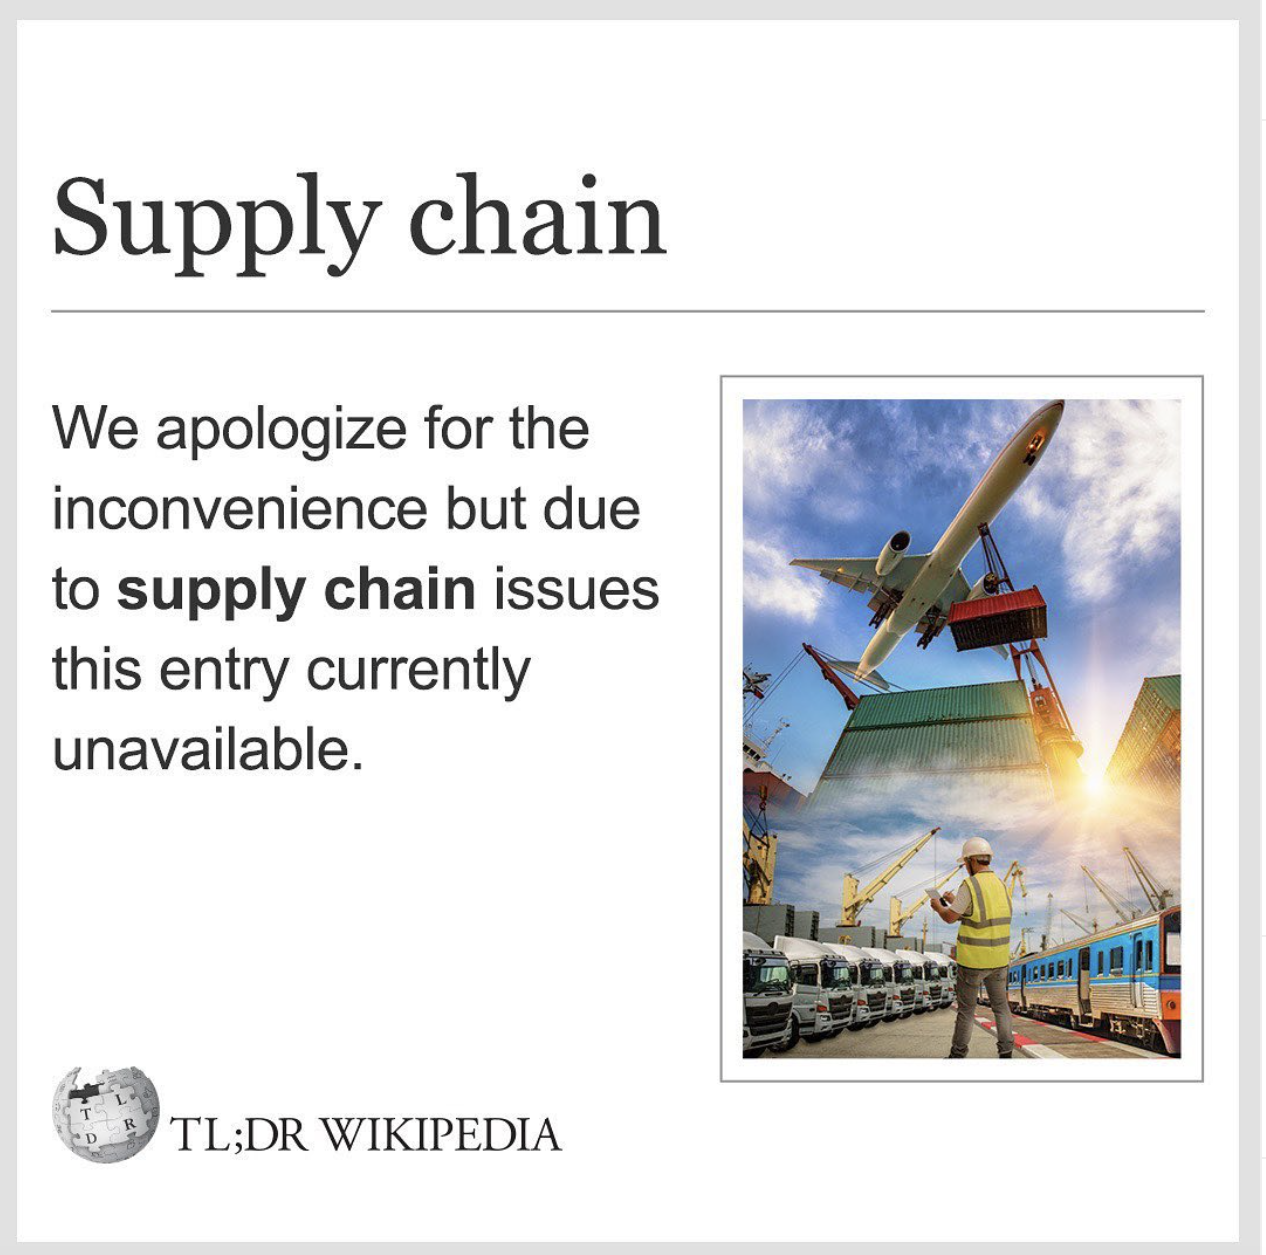 Wikipedia Memes - engineering - Supply chain We apologize for the inconvenience but due to supply chain issues this entry currently unavailable. Tl;Dr Wikipedia